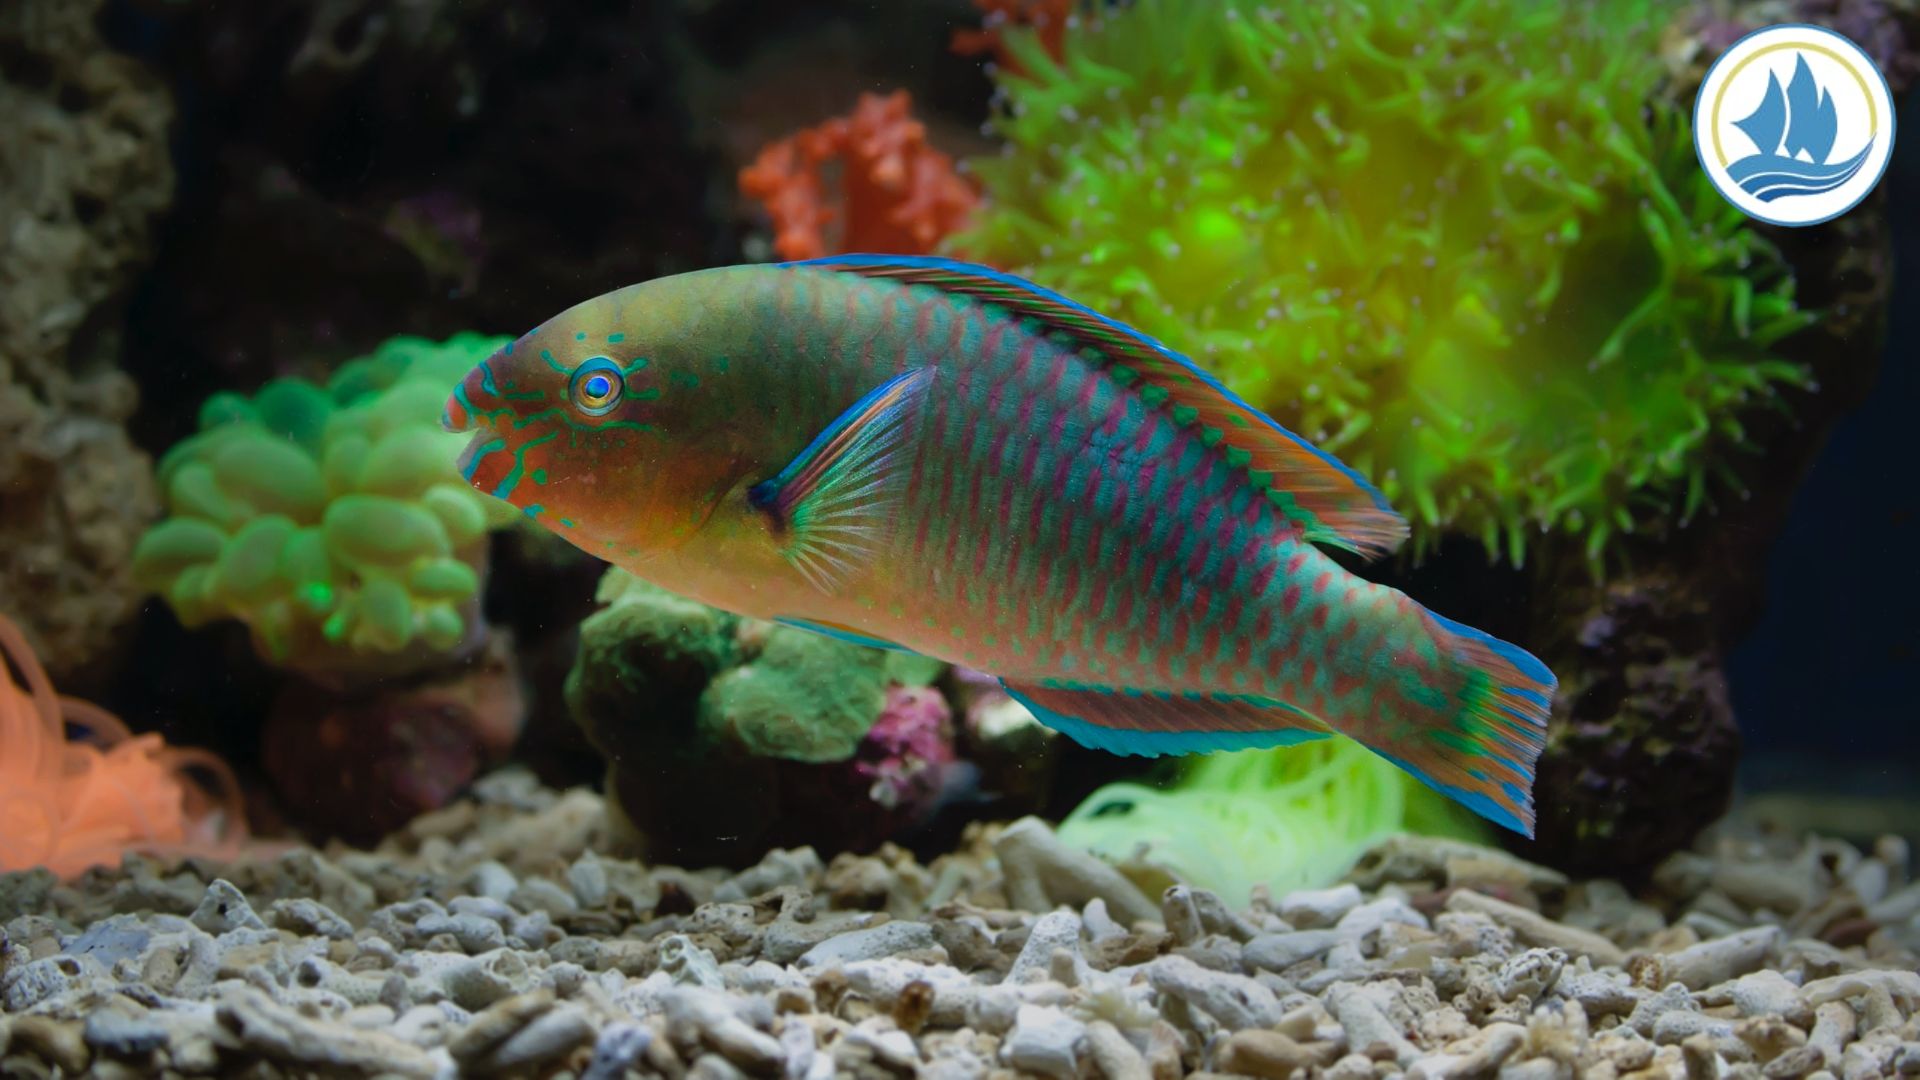 Here are the Parrotfish Habit and Environmental Roles